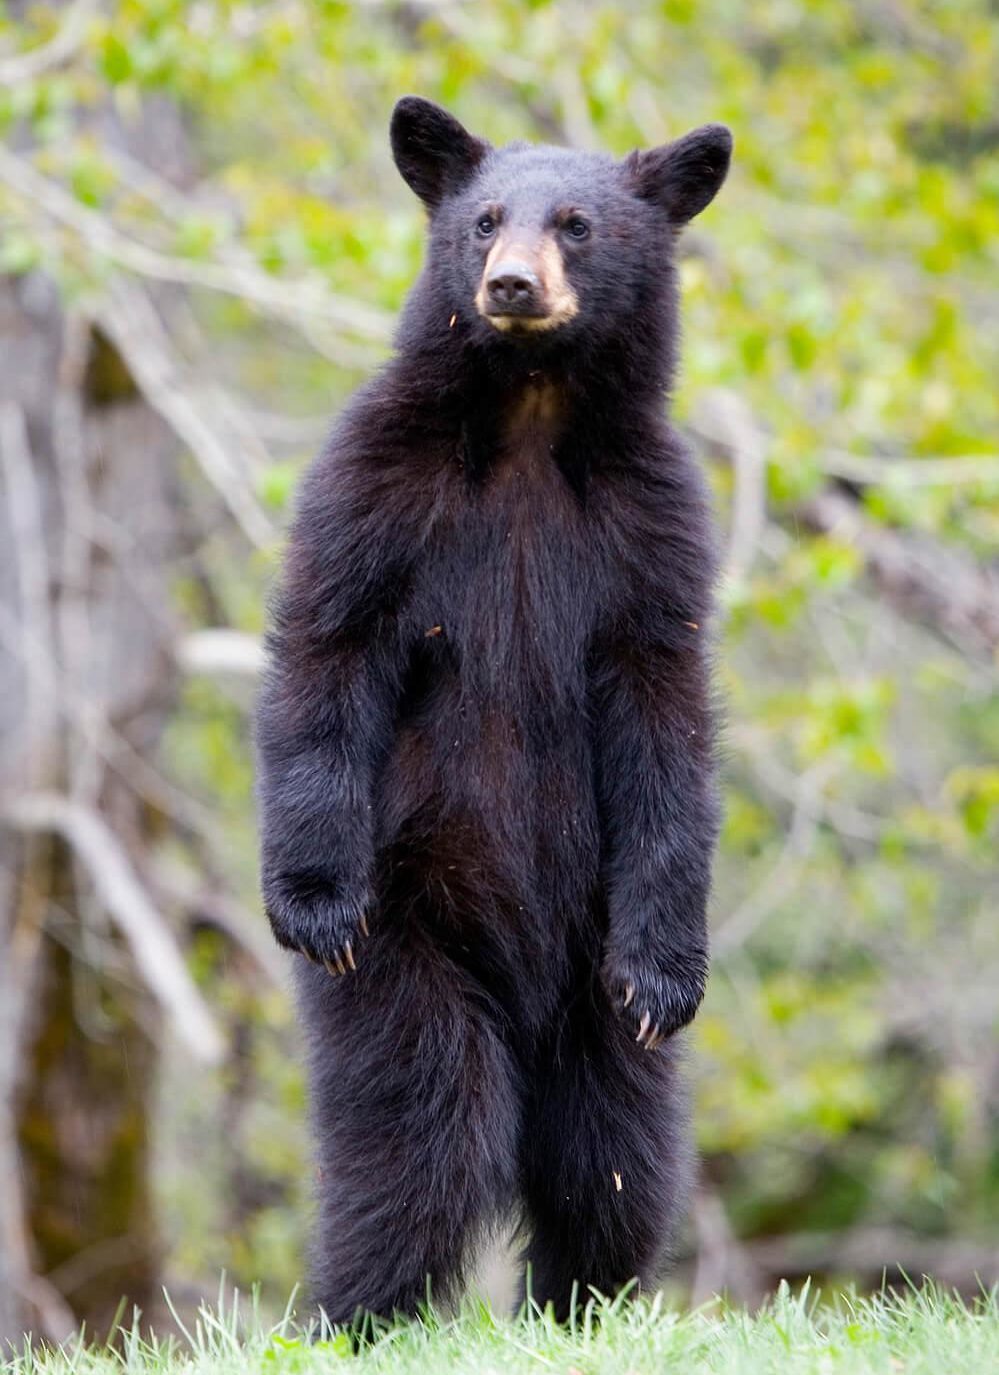 A black bear, standing on its hind legs